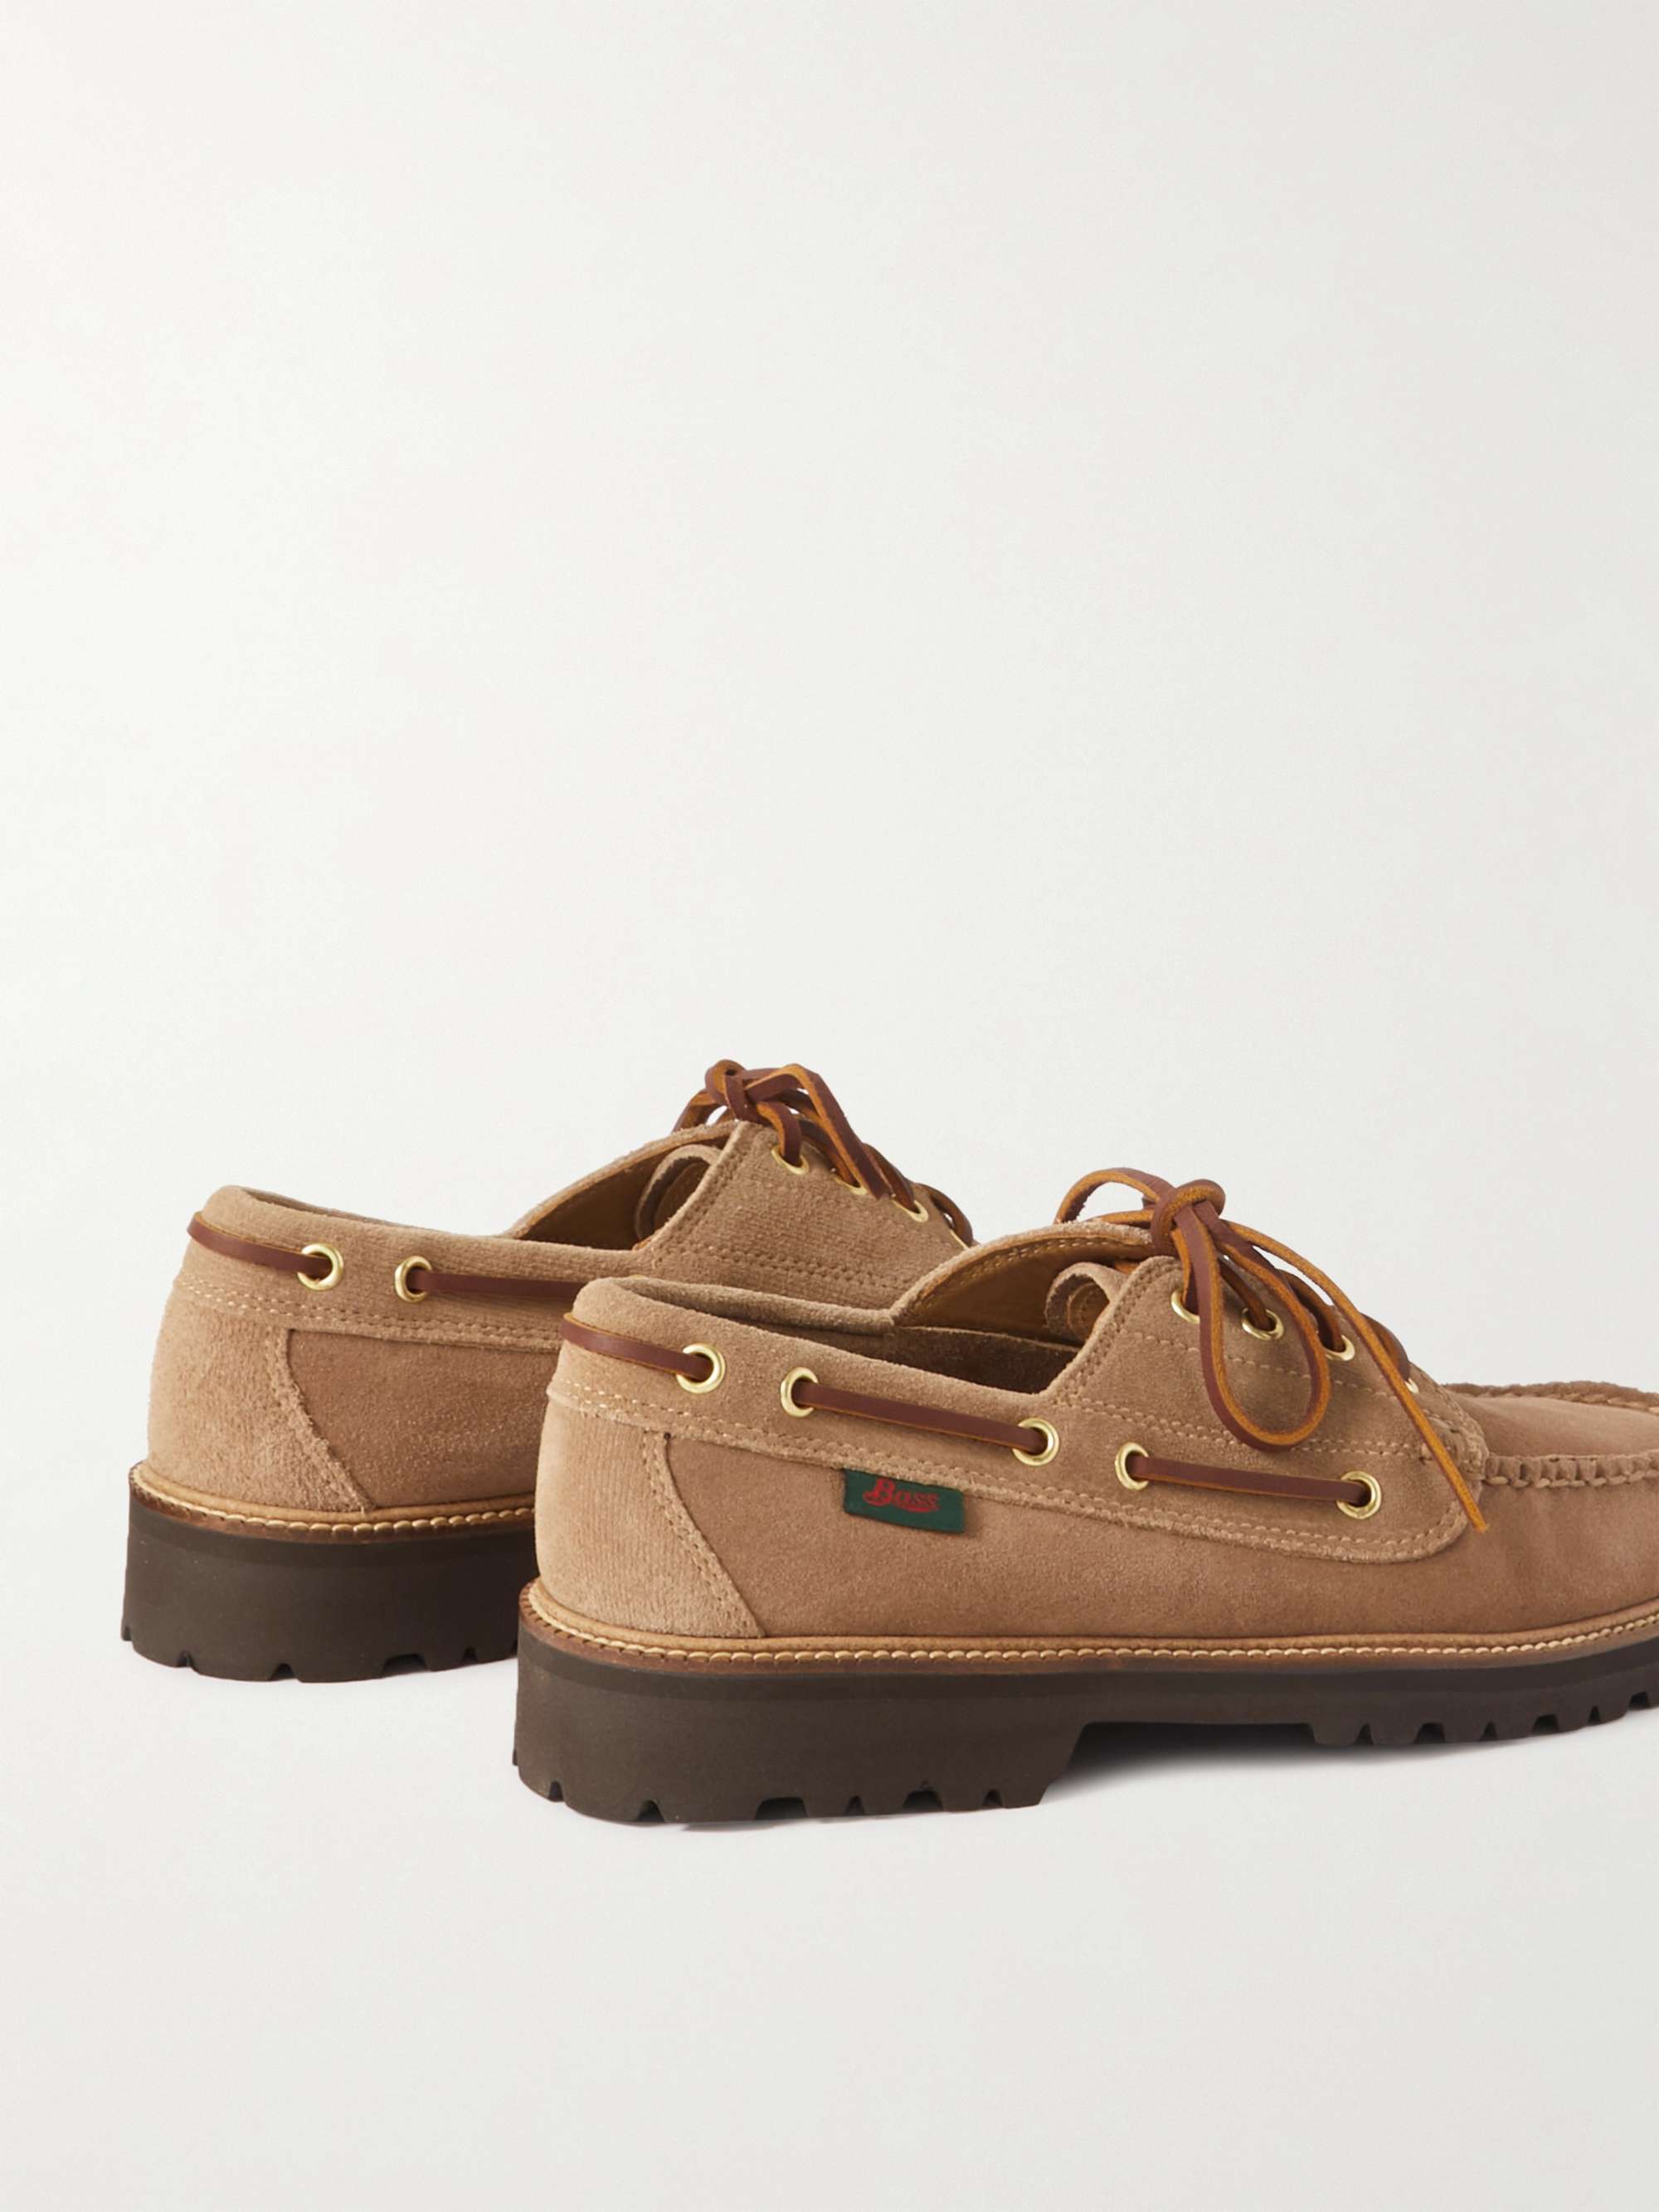 G.H. BASS & CO. Weejuns '90 Boater Mix Panelled Suede Boat Shoes